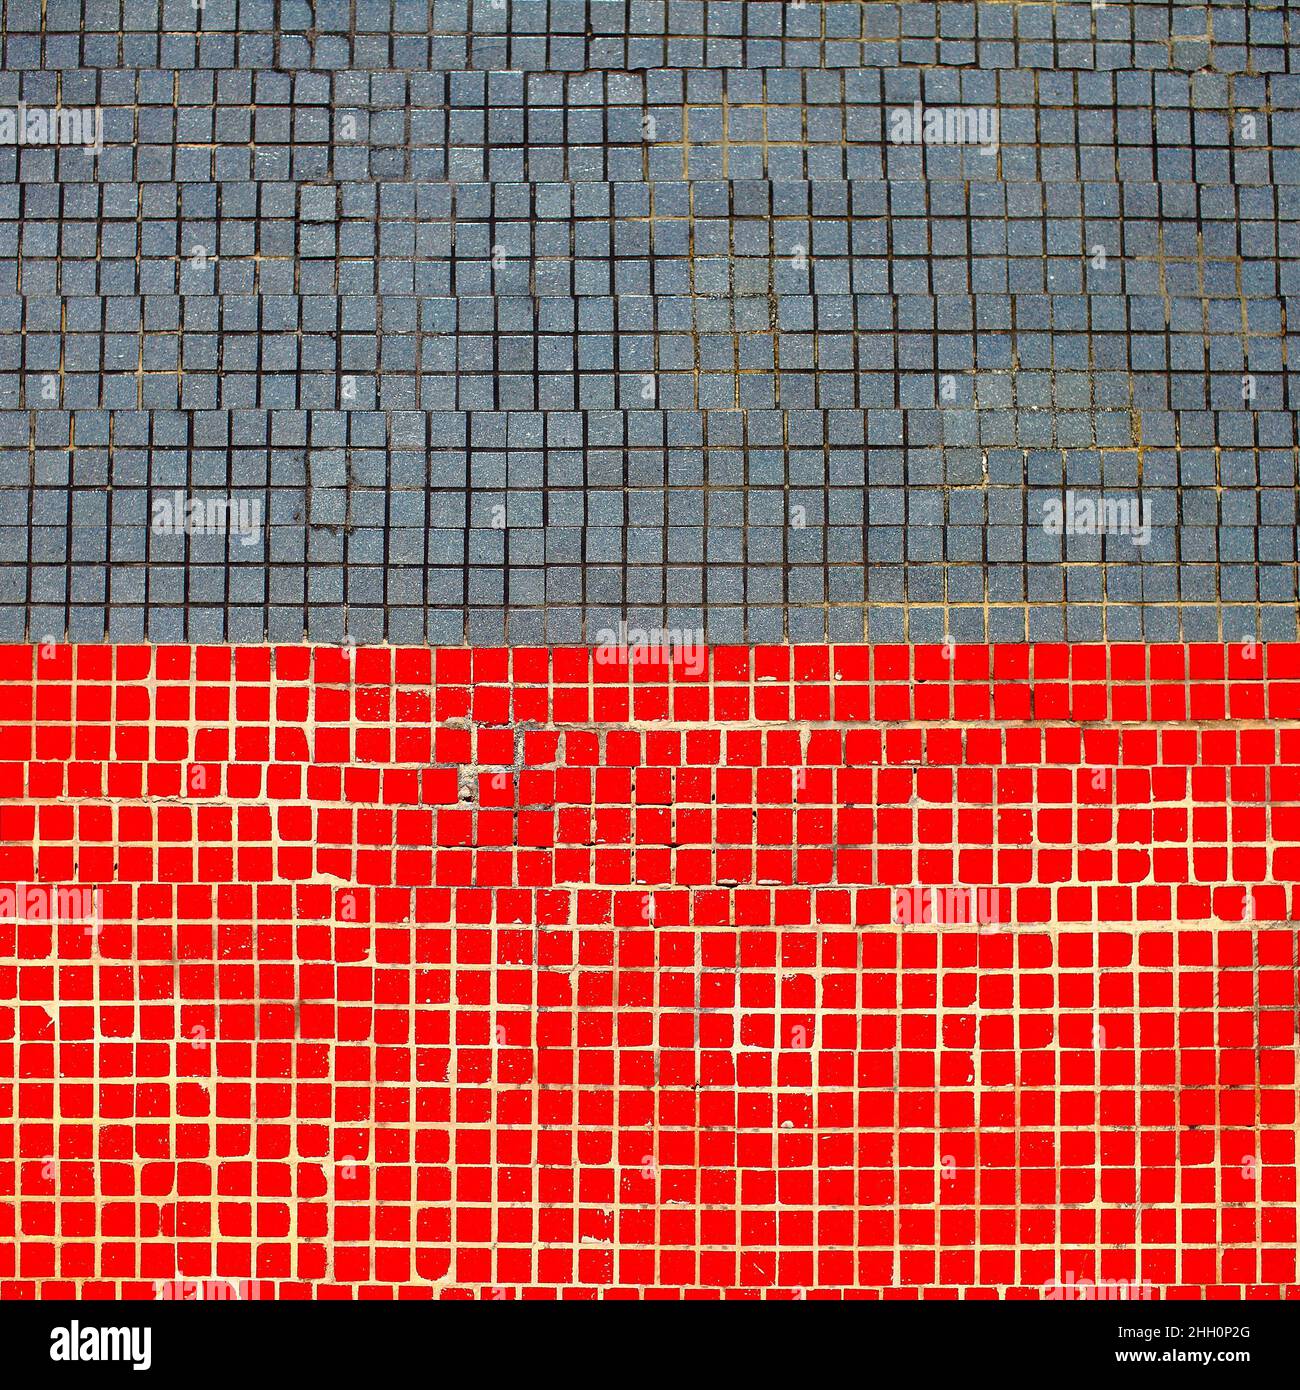 Small mosaic tiles combined in two colors, textured background. Stock Photo